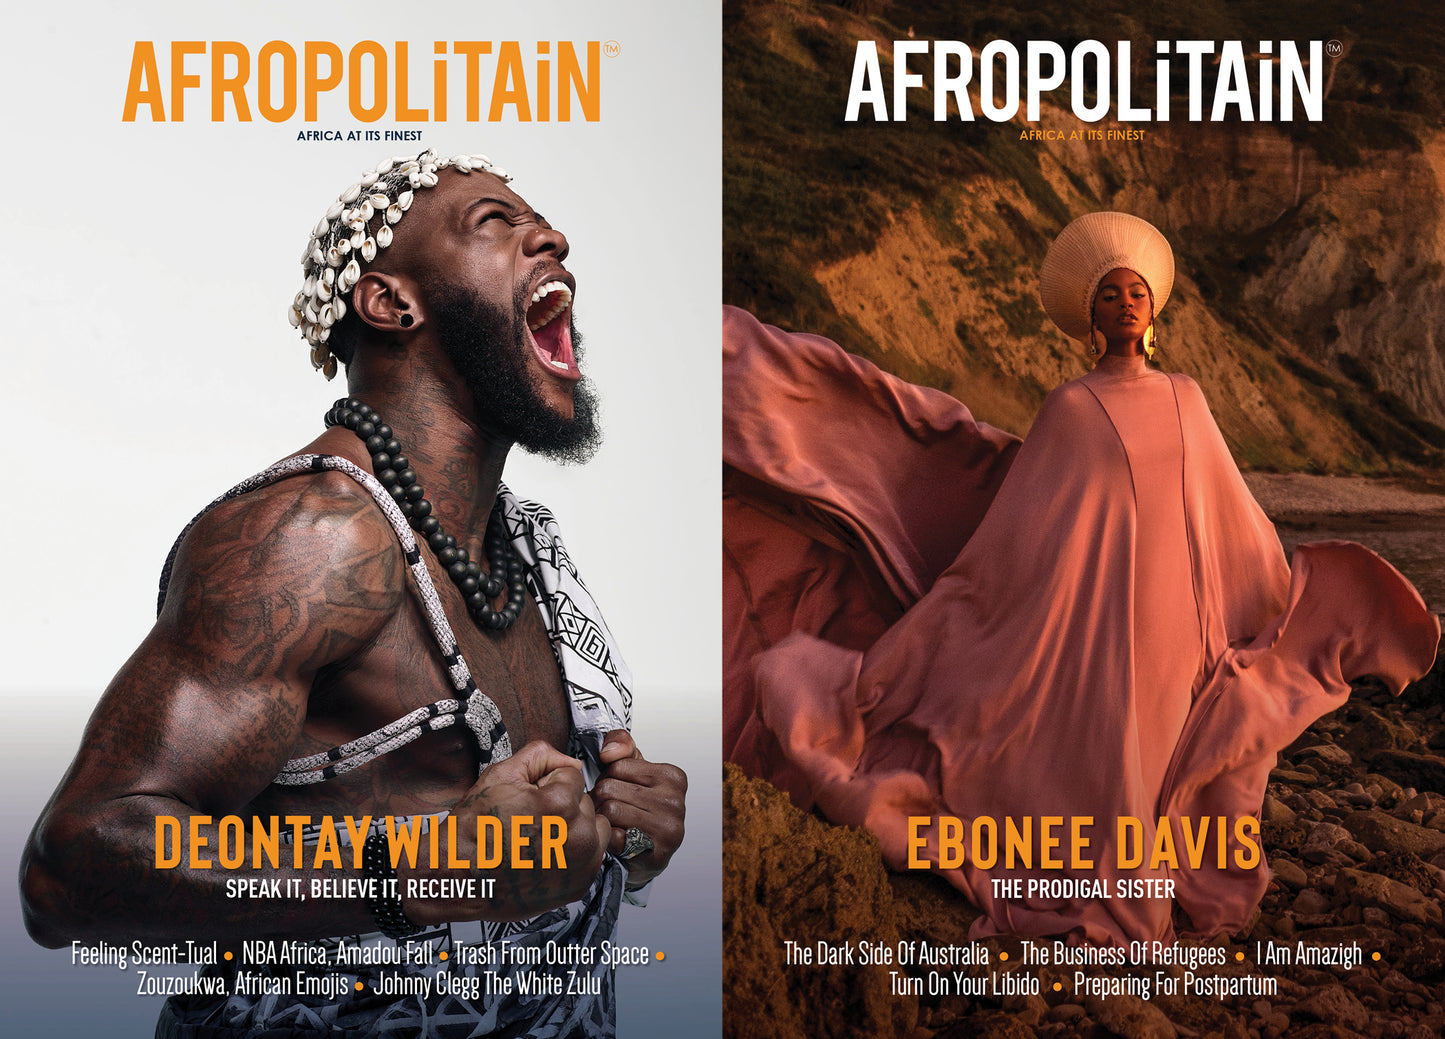 AFROPOLiTAiN Magazine - Issue 6 - Deontay Wilder and Ebonee Davis (Black History Month Edition)